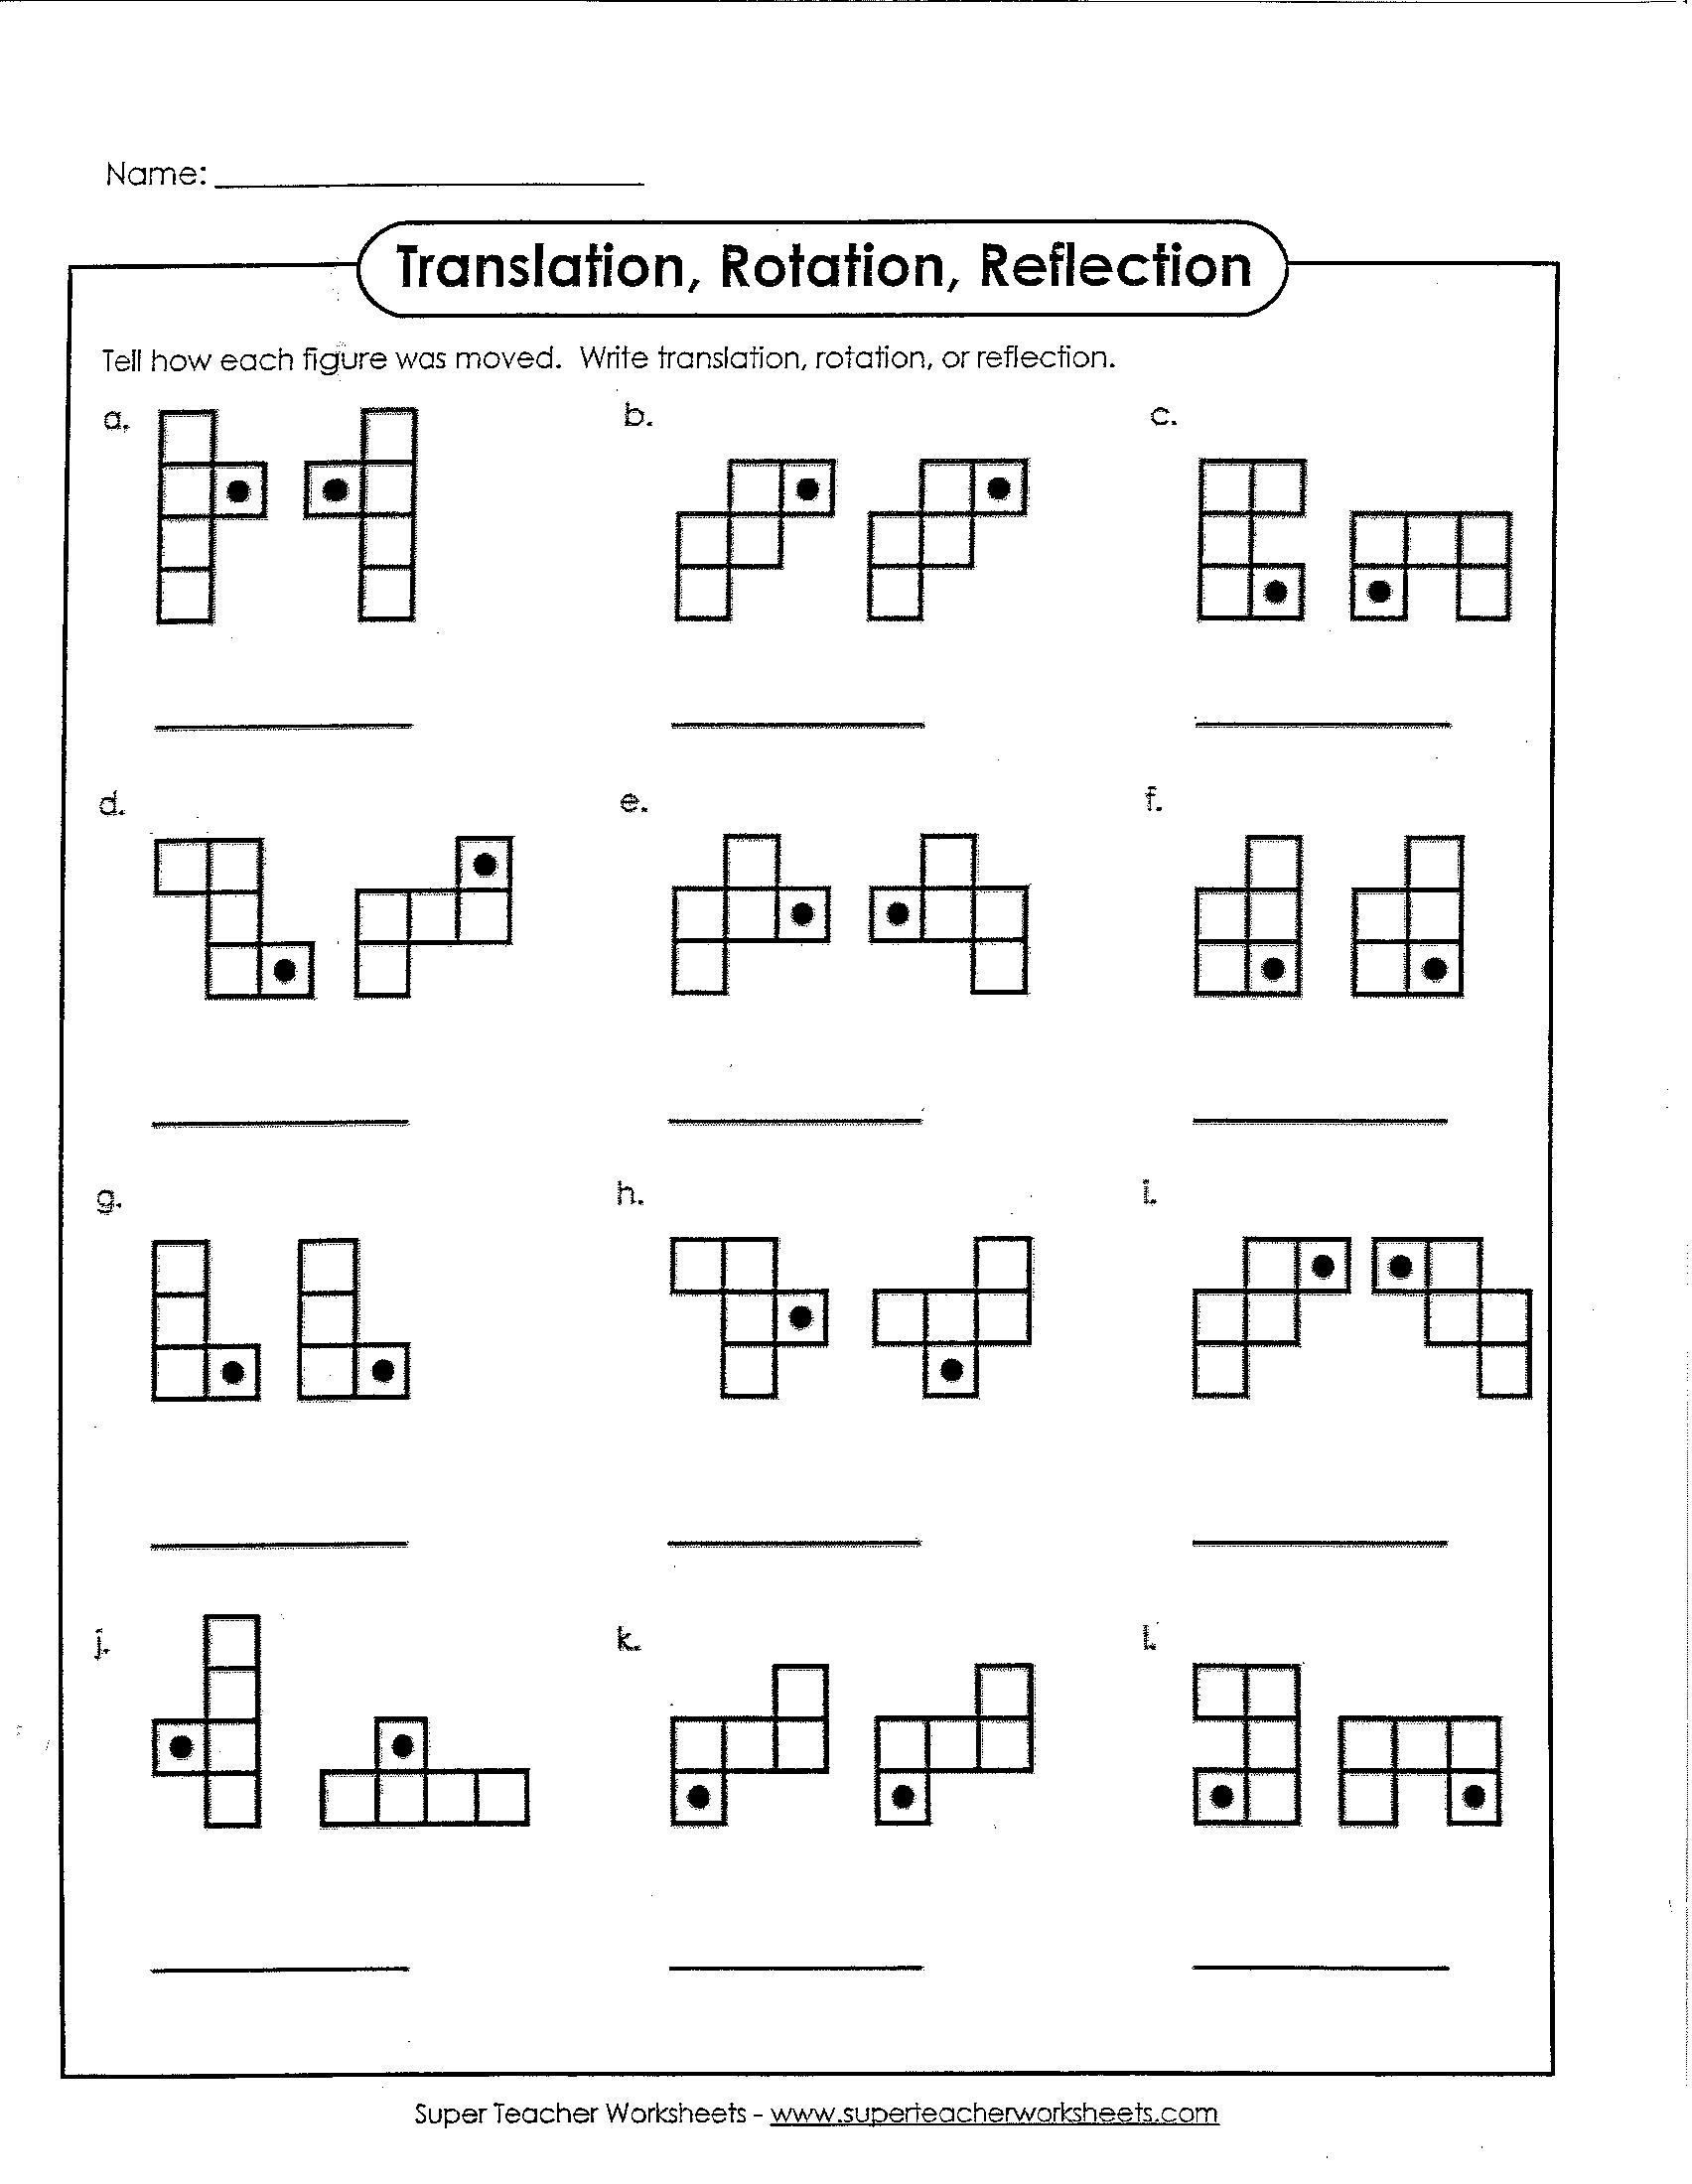 16 Best Images of Rotations Worksheet 8th Grade - Geometry Rotations